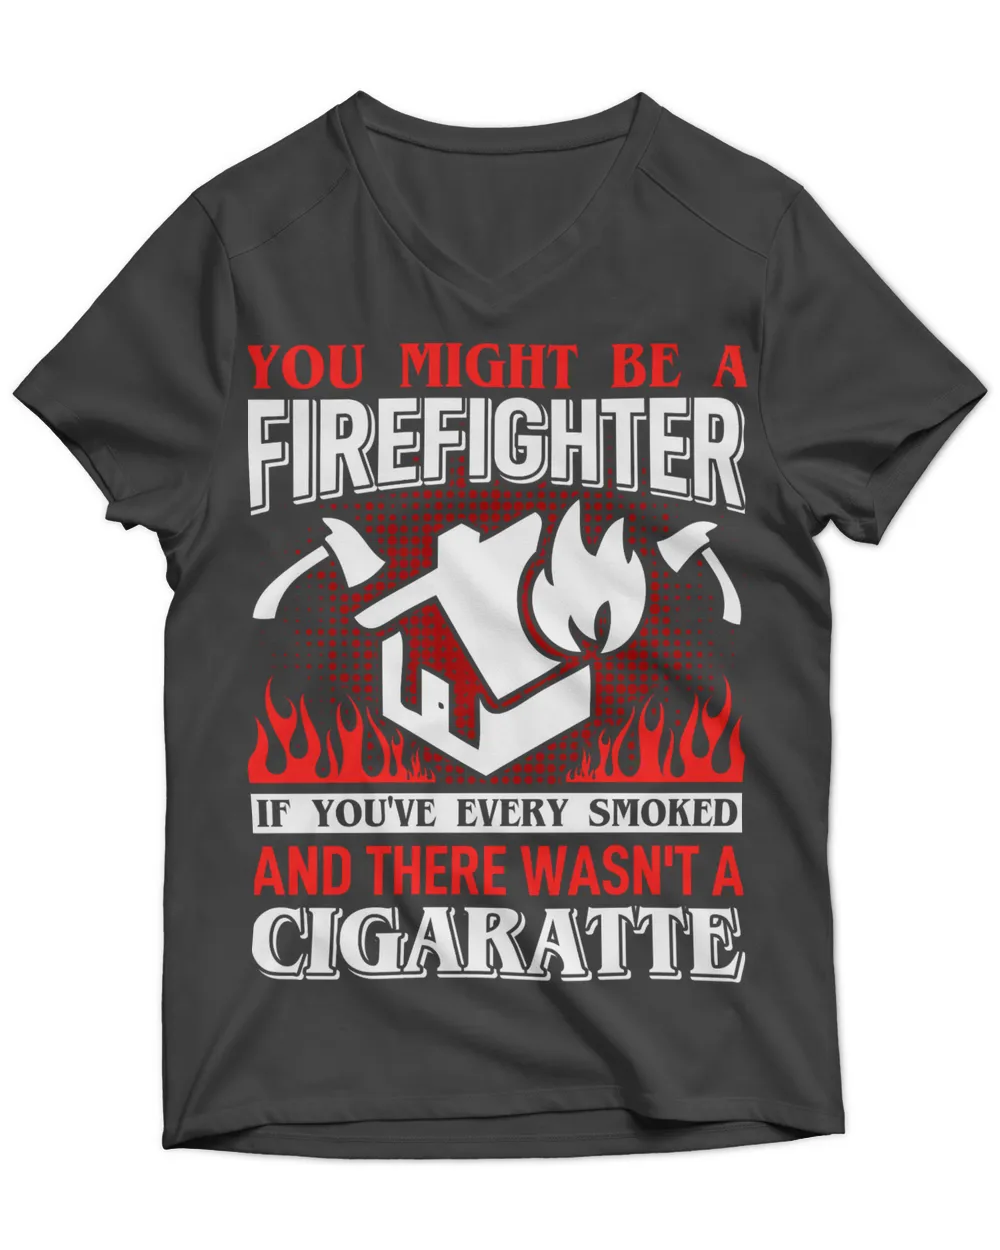 Firefighter T Shirt, Firefighter Hoodie, Firefighter Long Sleeved T-Shirt, Firefighter V-Neck T-Shirt, Firefighter Tank Top, Firefighter Shirt Funny Quotes